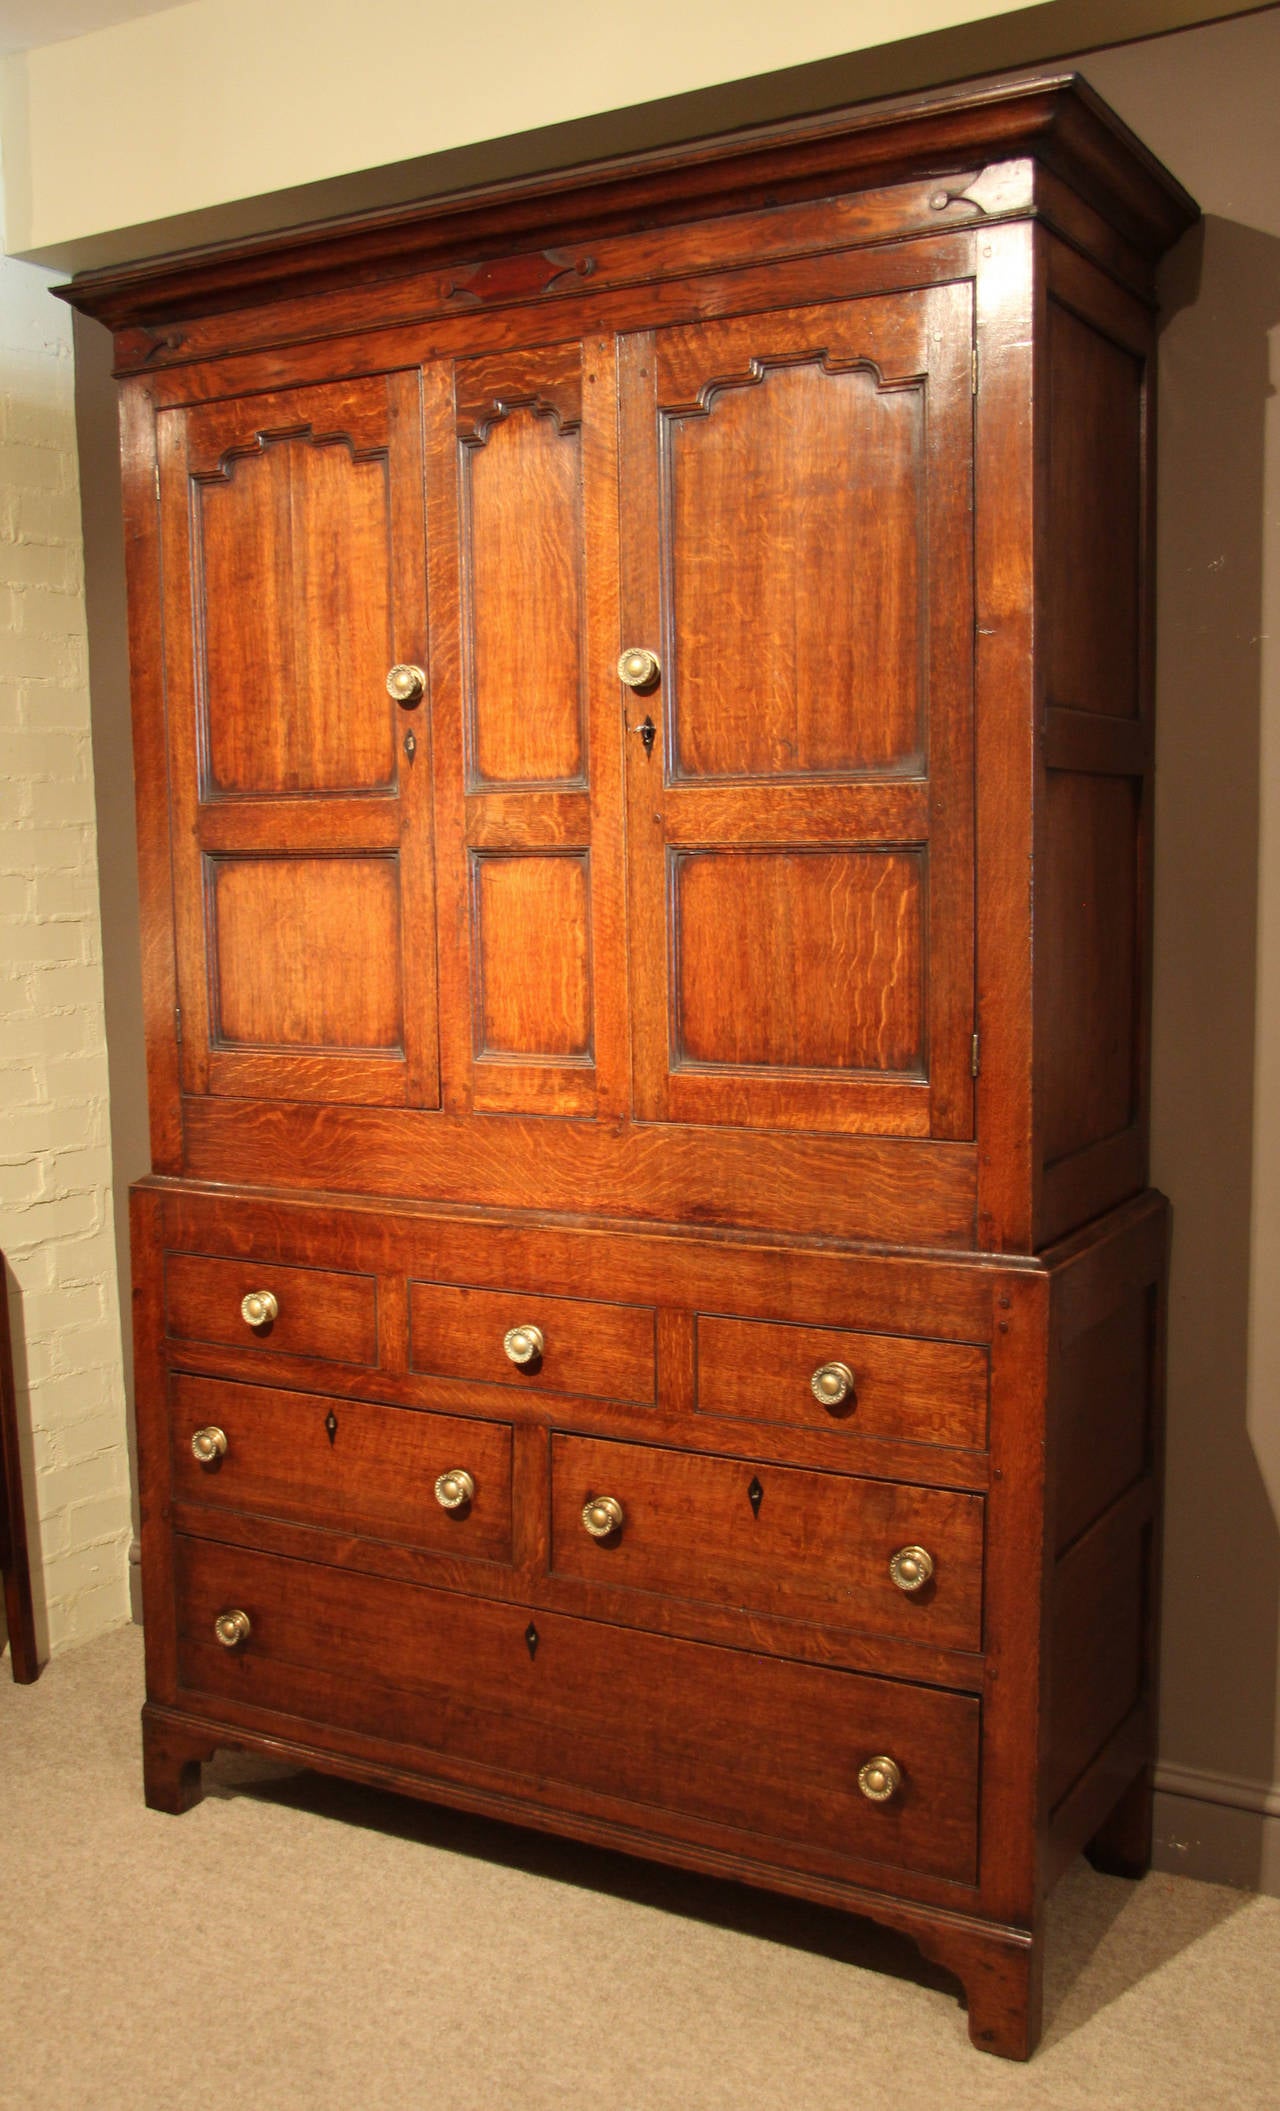 A handsome early 19th century oak livery/linen cupboard with three dummy drawers and two long. The cupboard has the original hanging pegs, also modern clothes rail. Attractive panelled construction and in excellent order, circa 1820. 

All of the